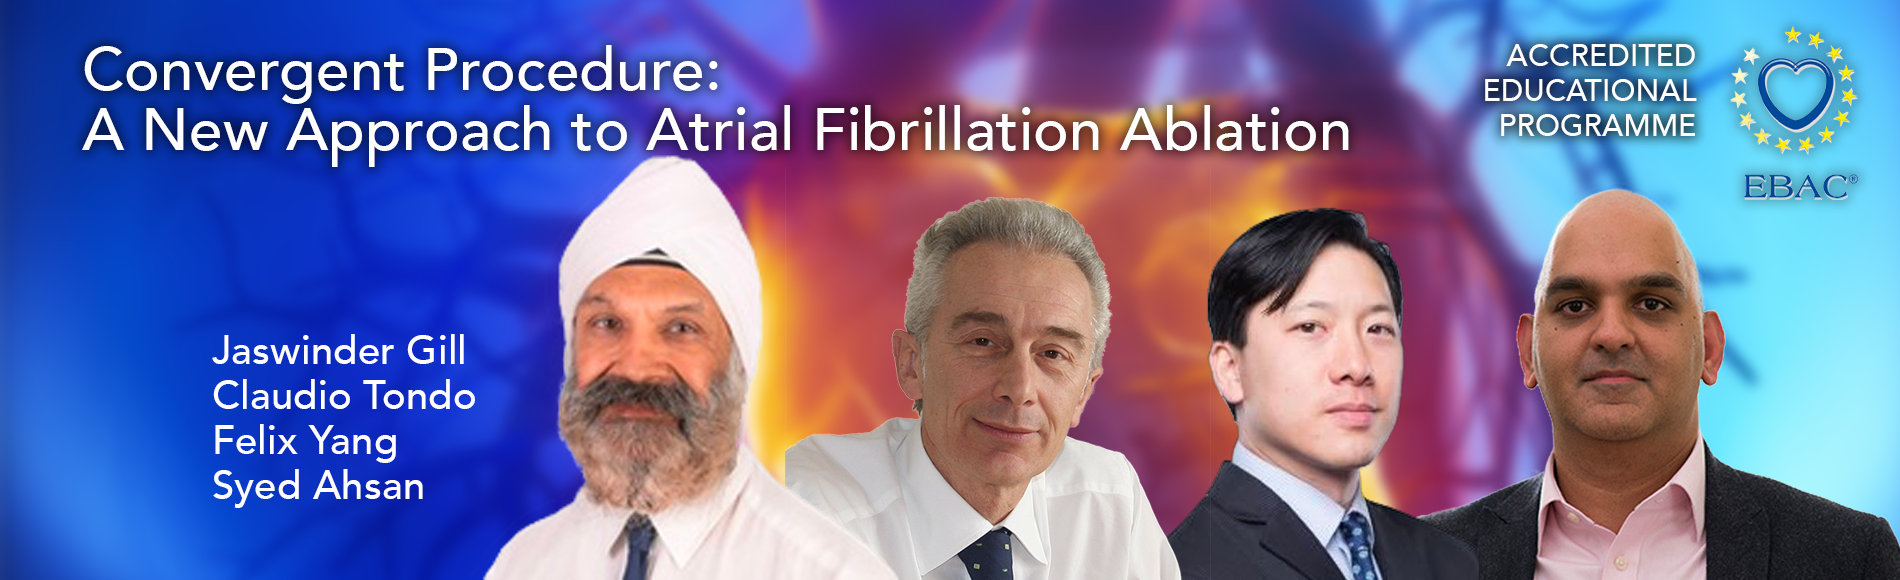 Convergent Procedure: A New Approach to Atrial Fibrillation Ablation